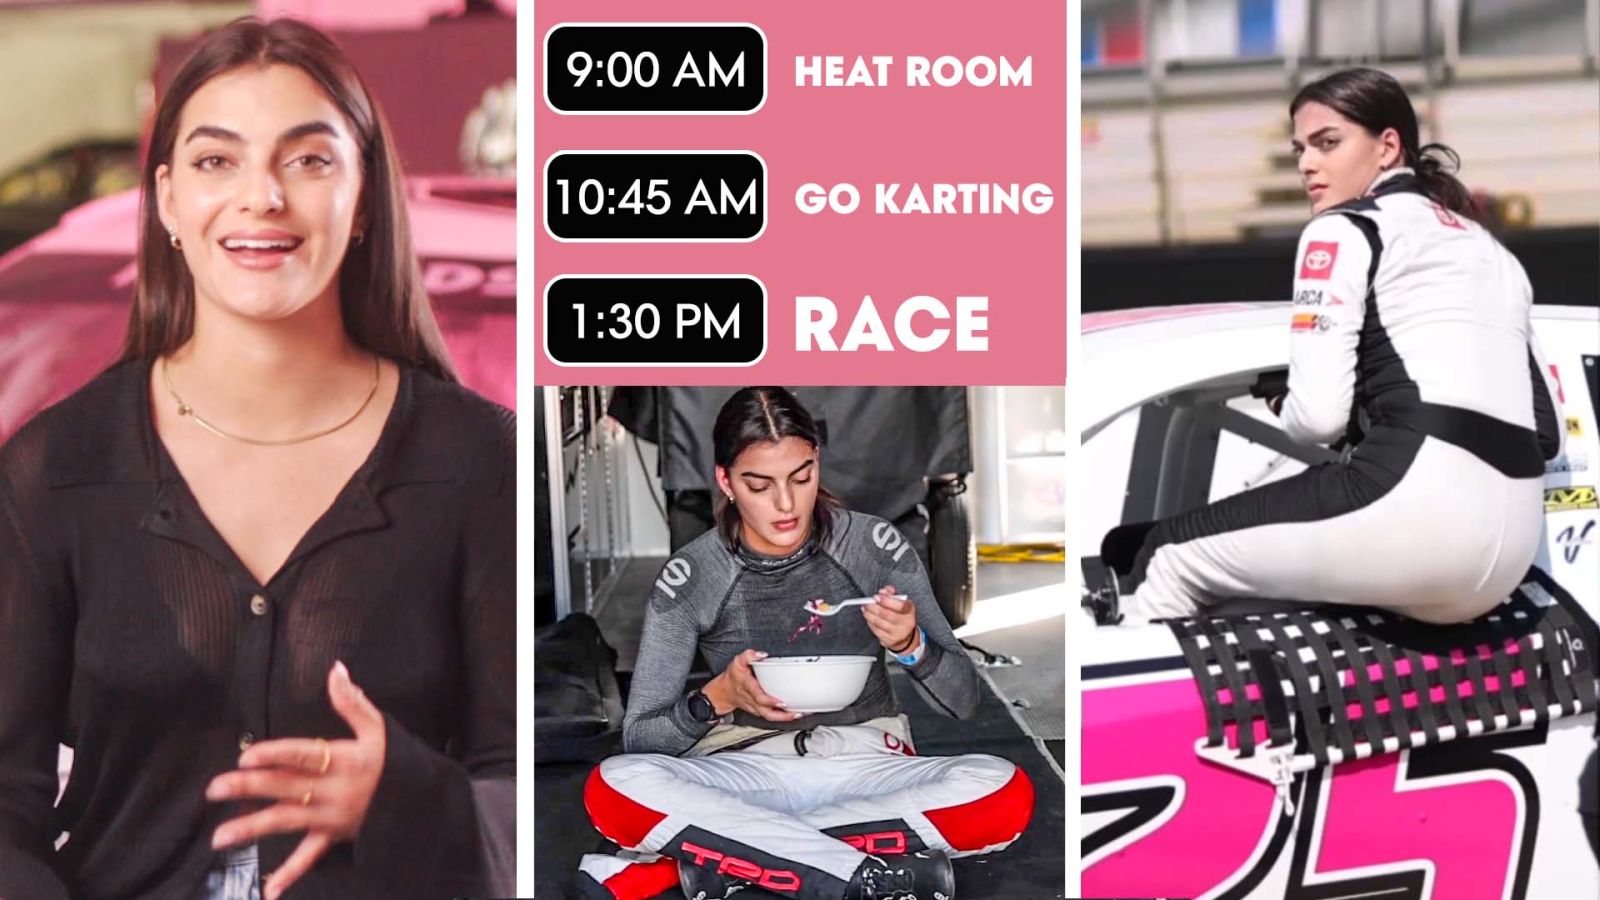 23-Year-Old NASCAR Driver's Daily Routine 1 Week Before Her Races